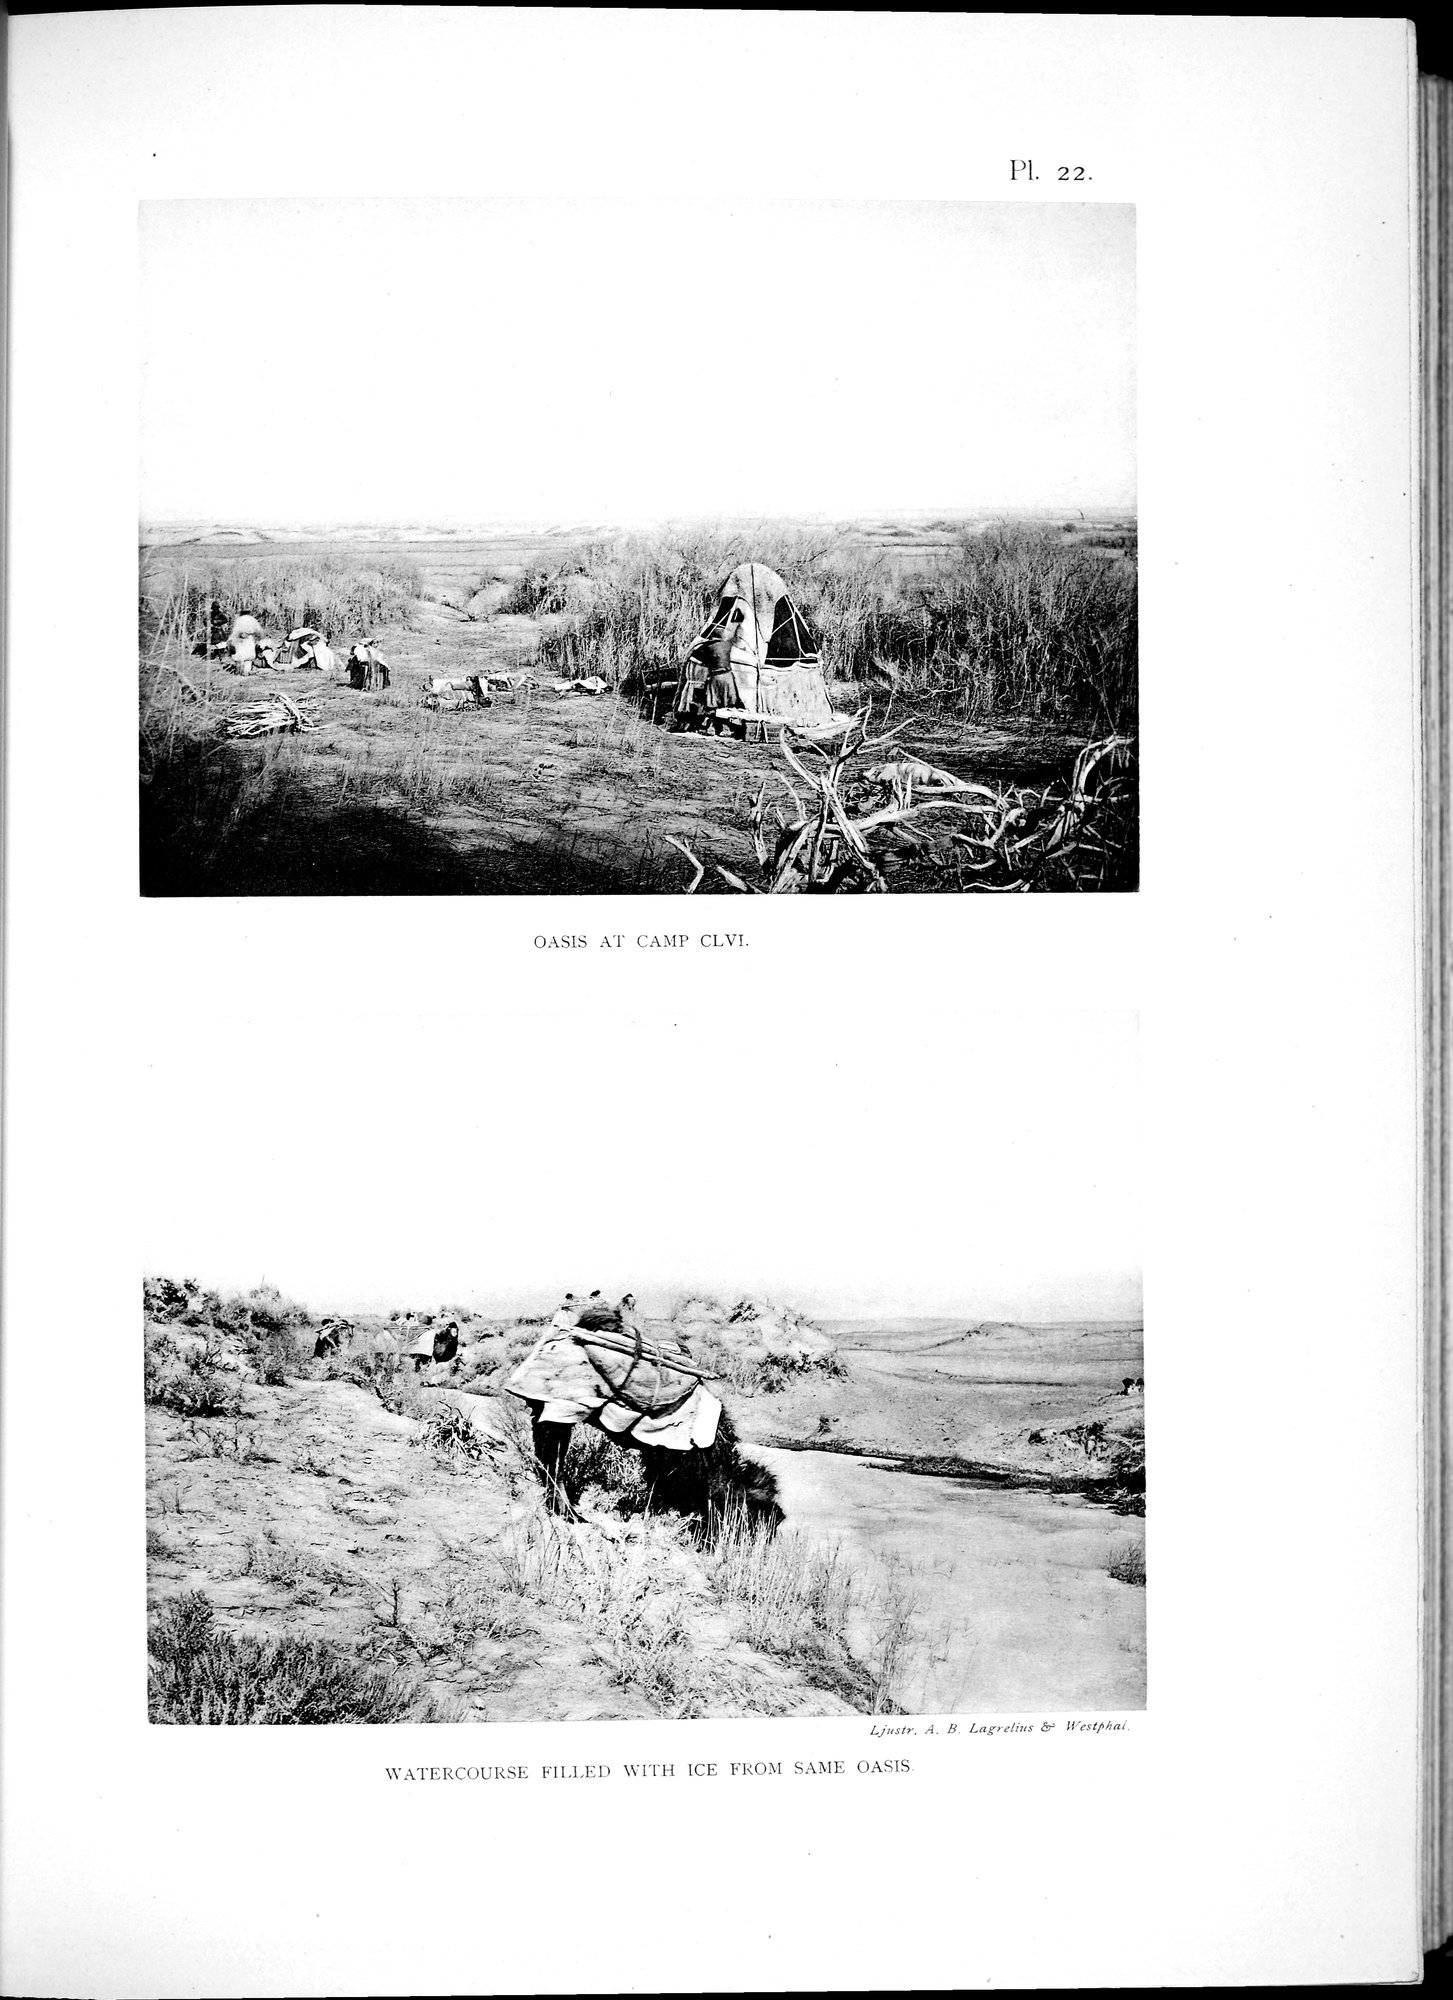 Scientific Results of a Journey in Central Asia, 1899-1902 : vol.2 / 289 ページ（白黒高解像度画像）